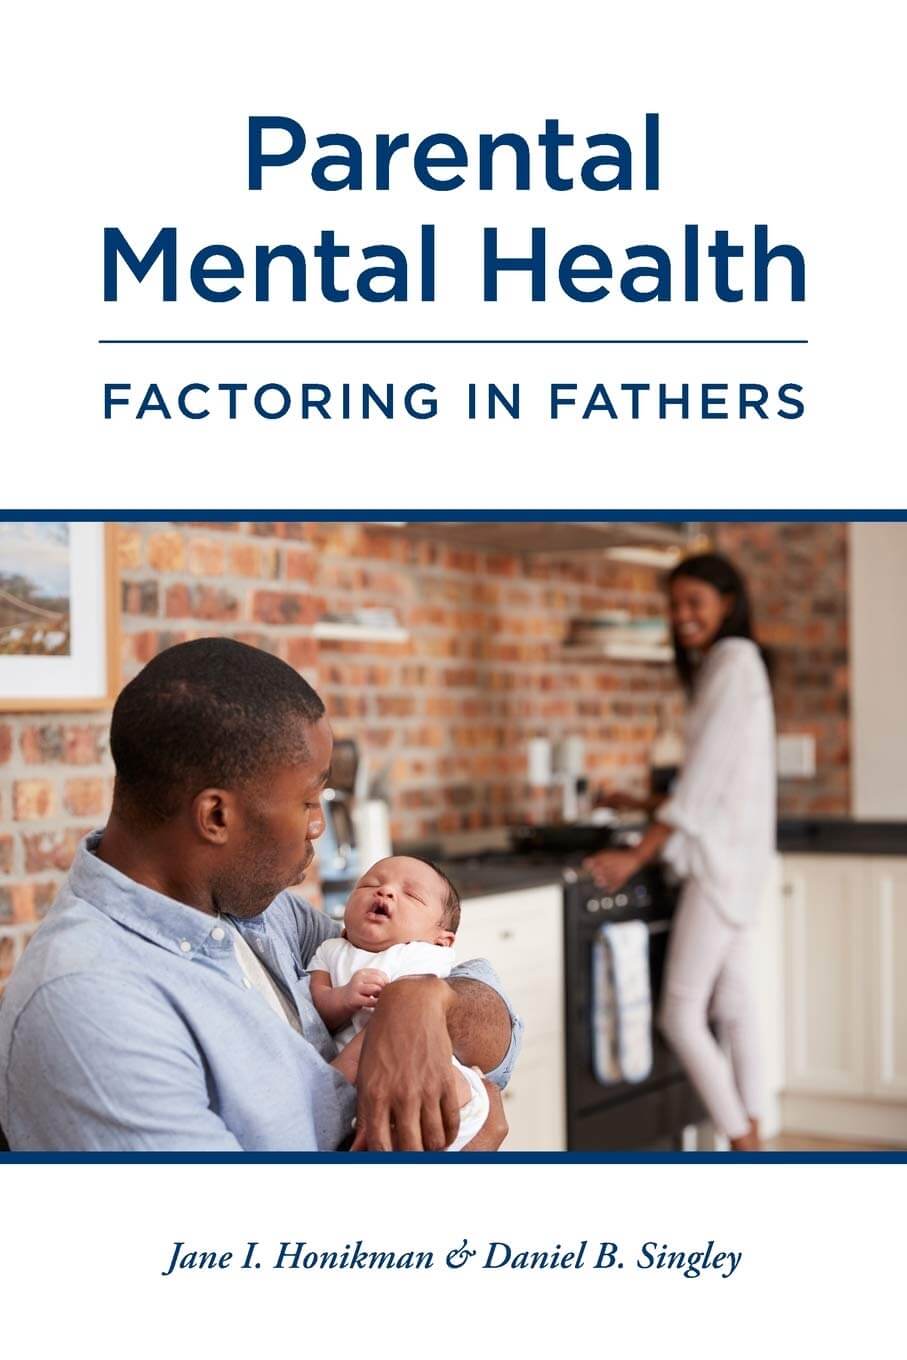 Parental Mental Health: Factoring in Fathers